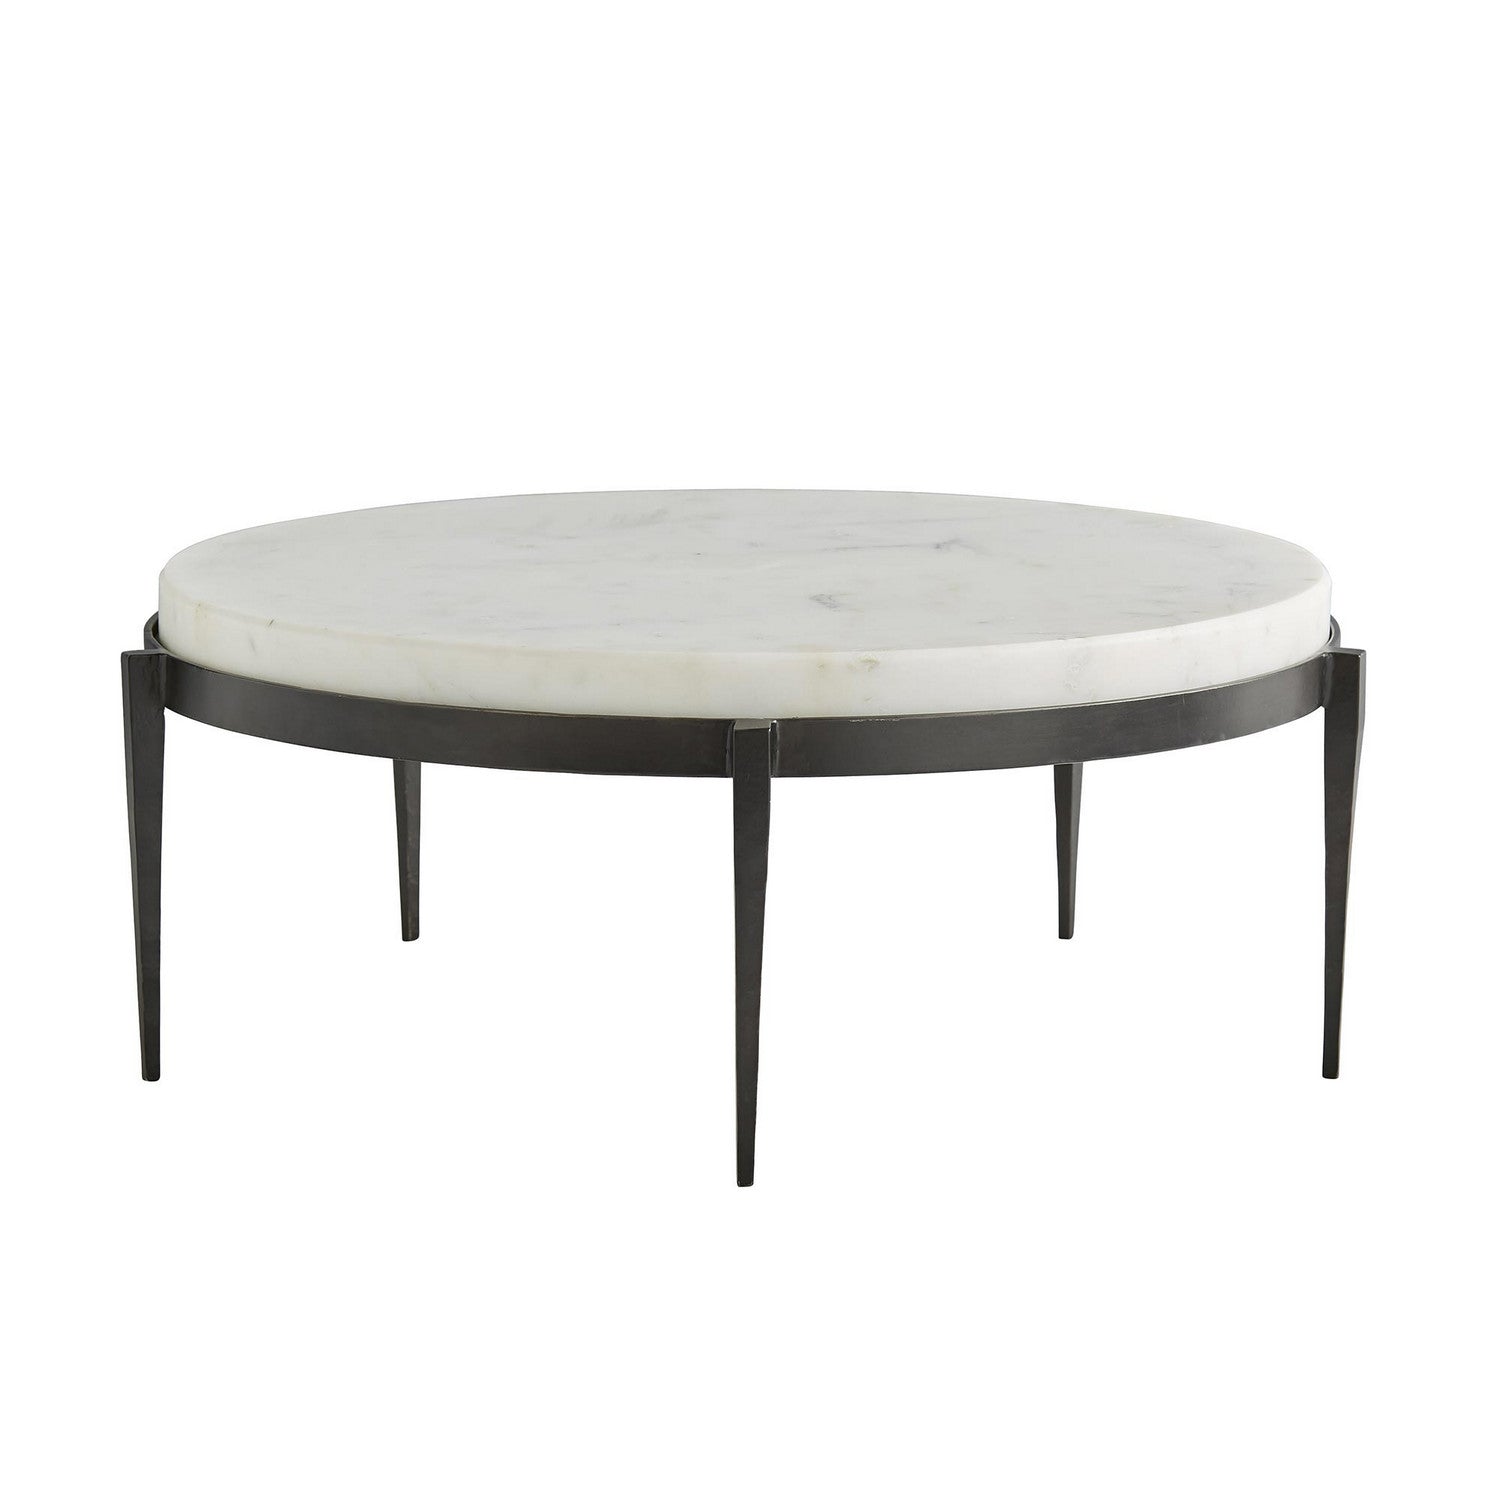 Cocktail Table from the Kelsie collection in Black finish